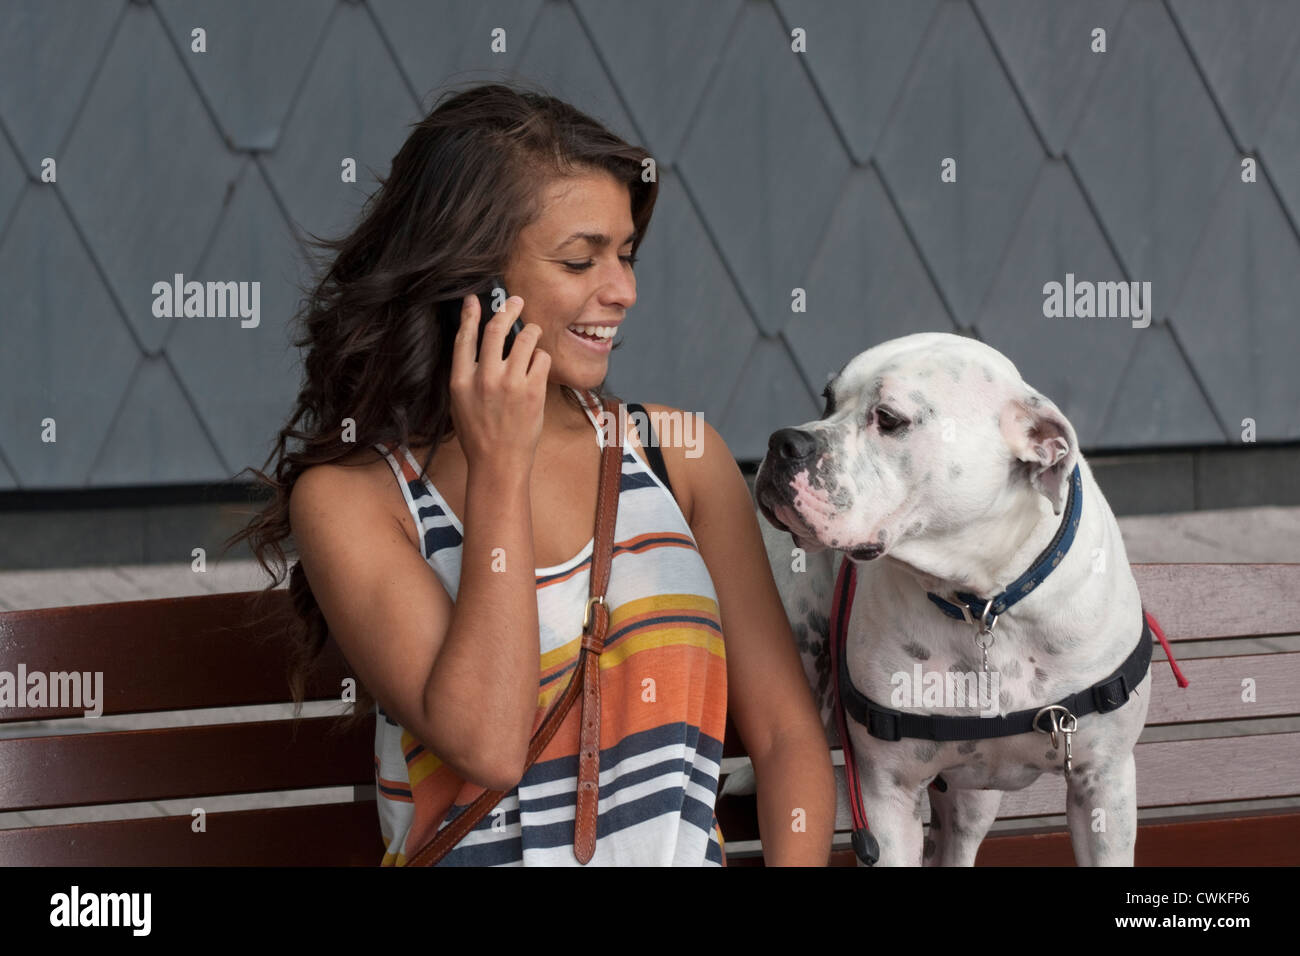 young woman sitting on bench with her dog, talking on mobile phone Stock Photo